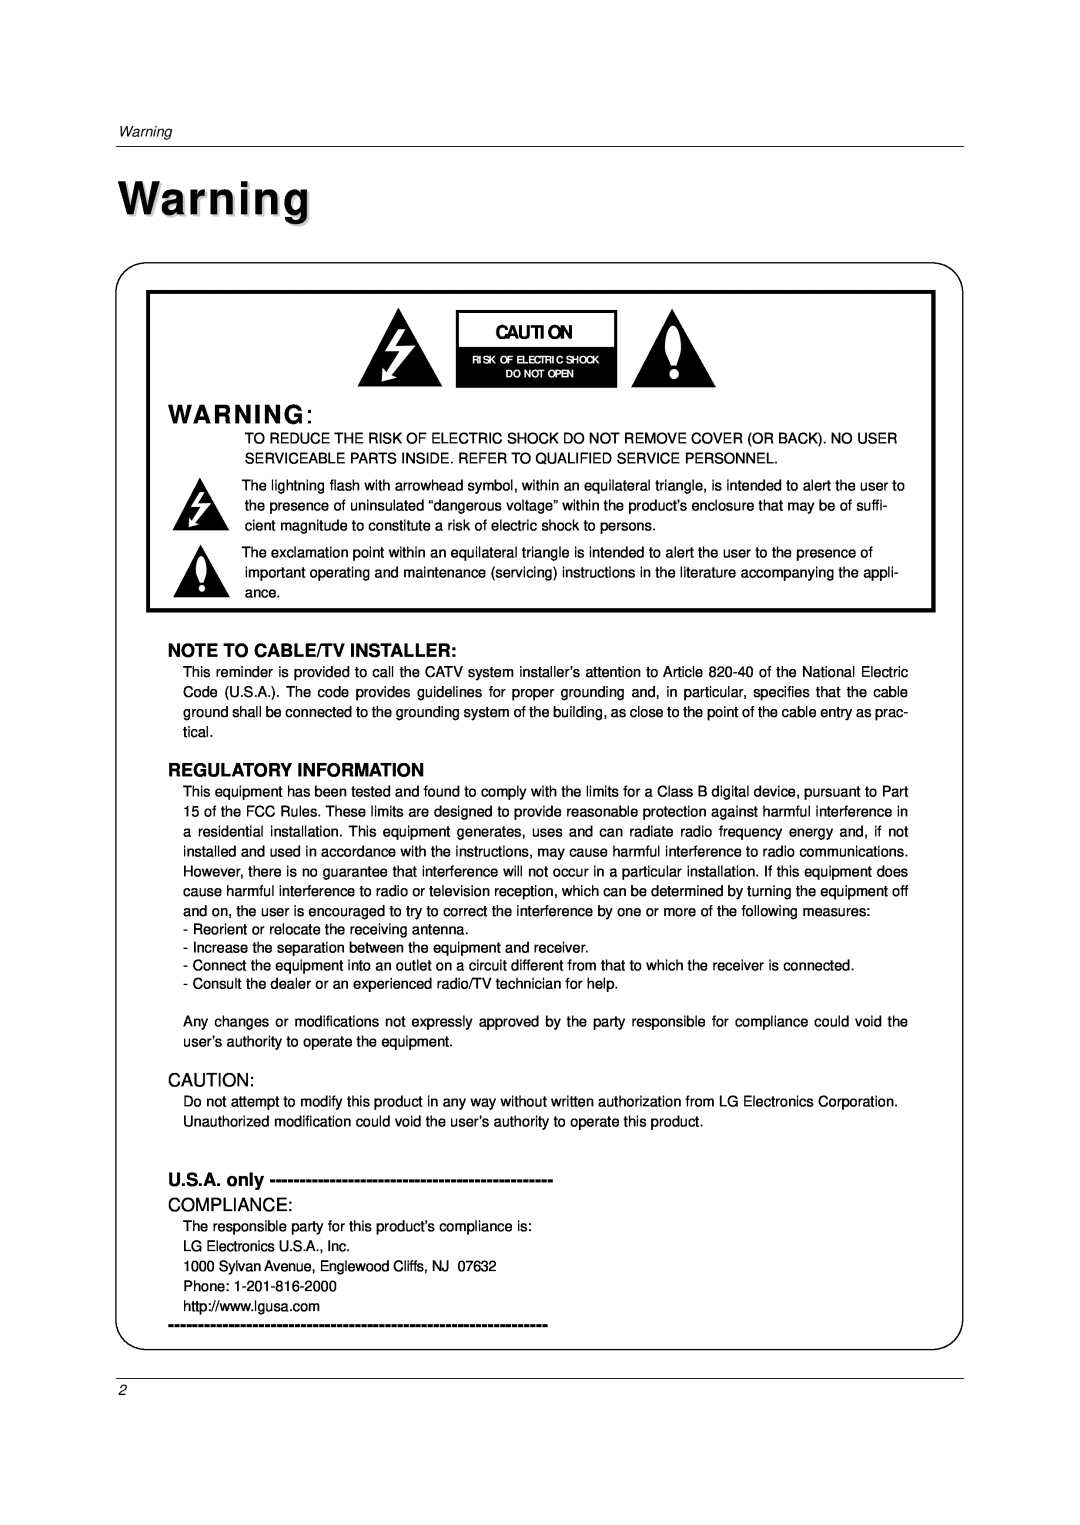 LG Electronics DU-37LZ30 owner manual Note To Cable/Tv Installer, Regulatory Information, U.S.A. only, Compliance 